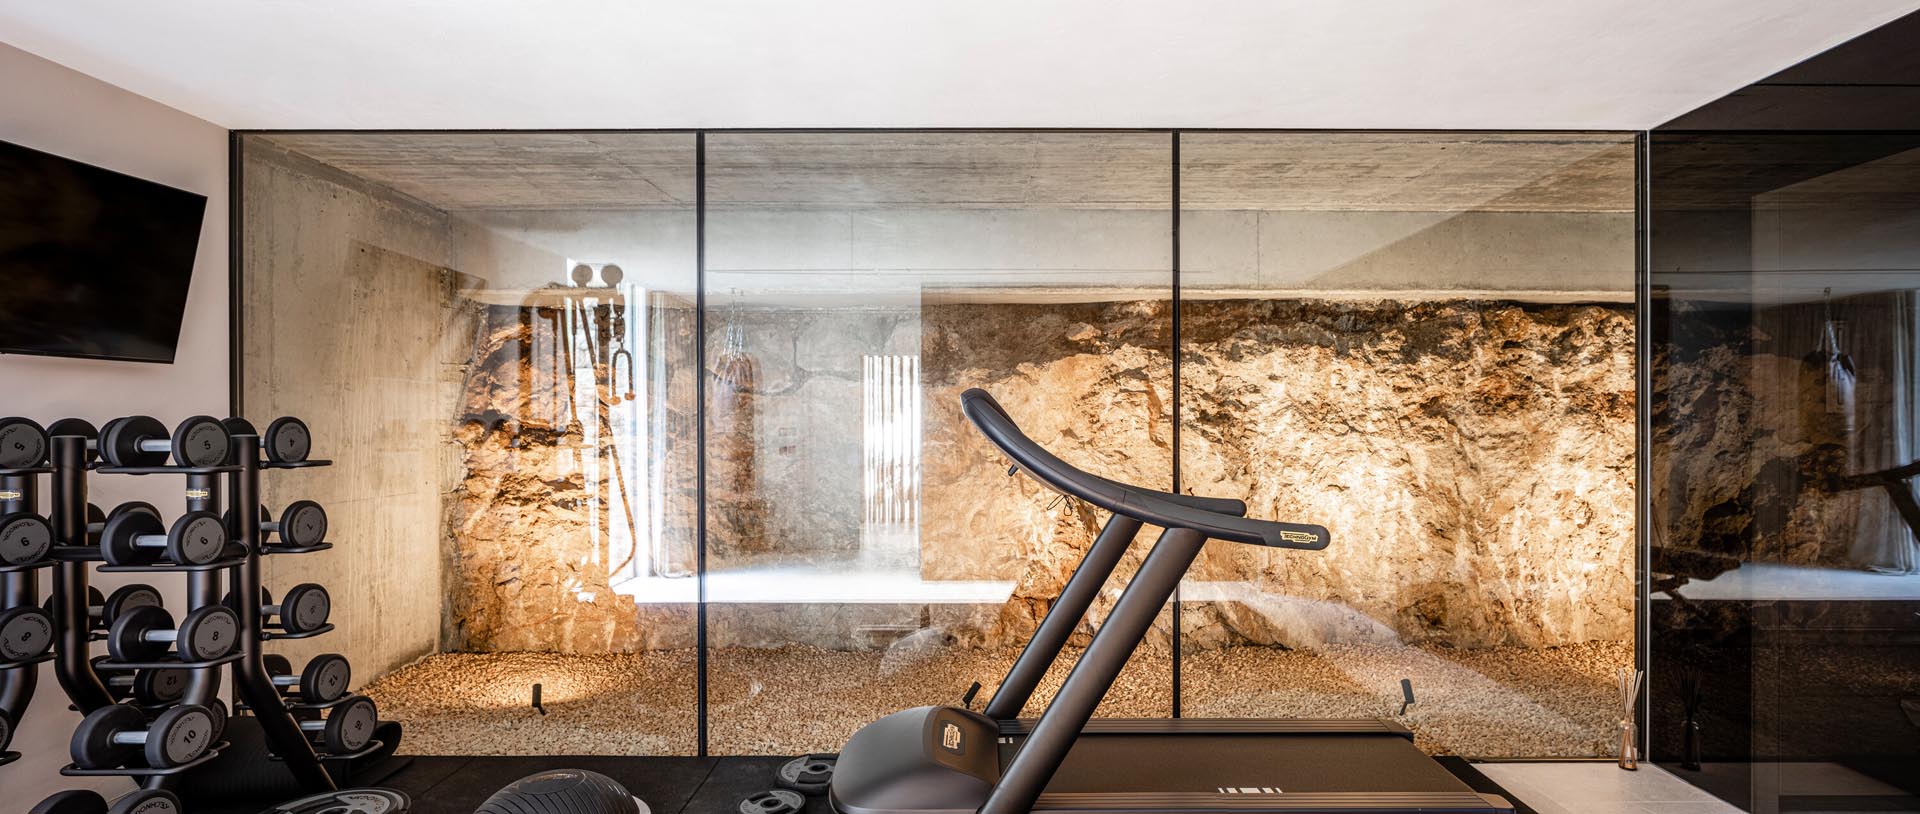 A modern home gym with a unique feature of floor-to-ceiling glass walls that provide views of the natural rock found on the homes building site.